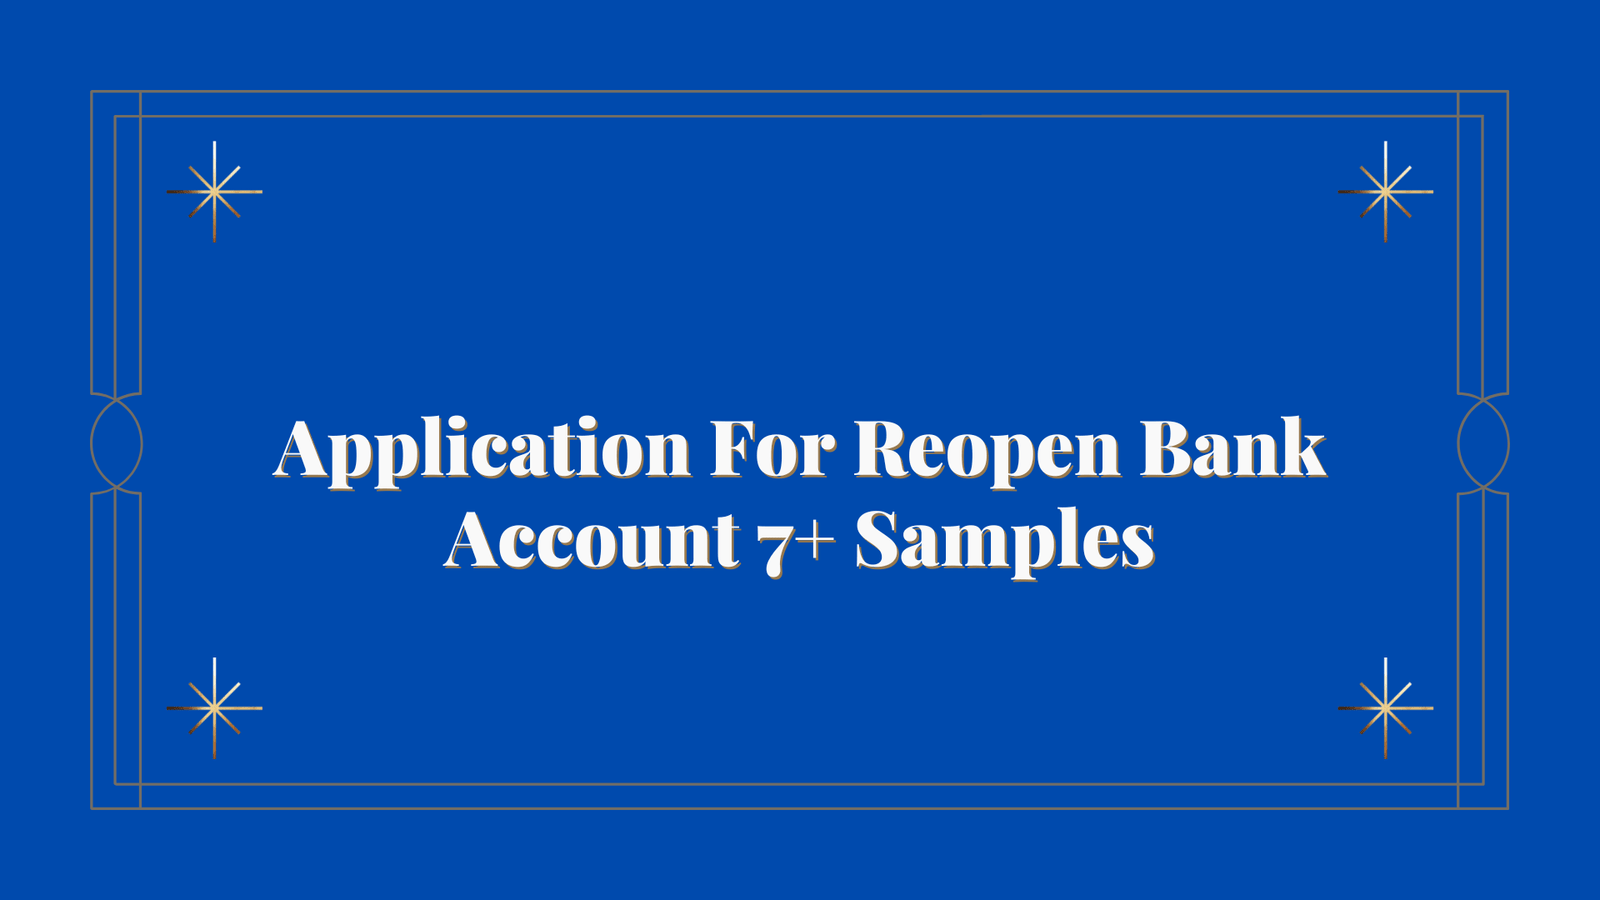 Application For Reopen Bank Account